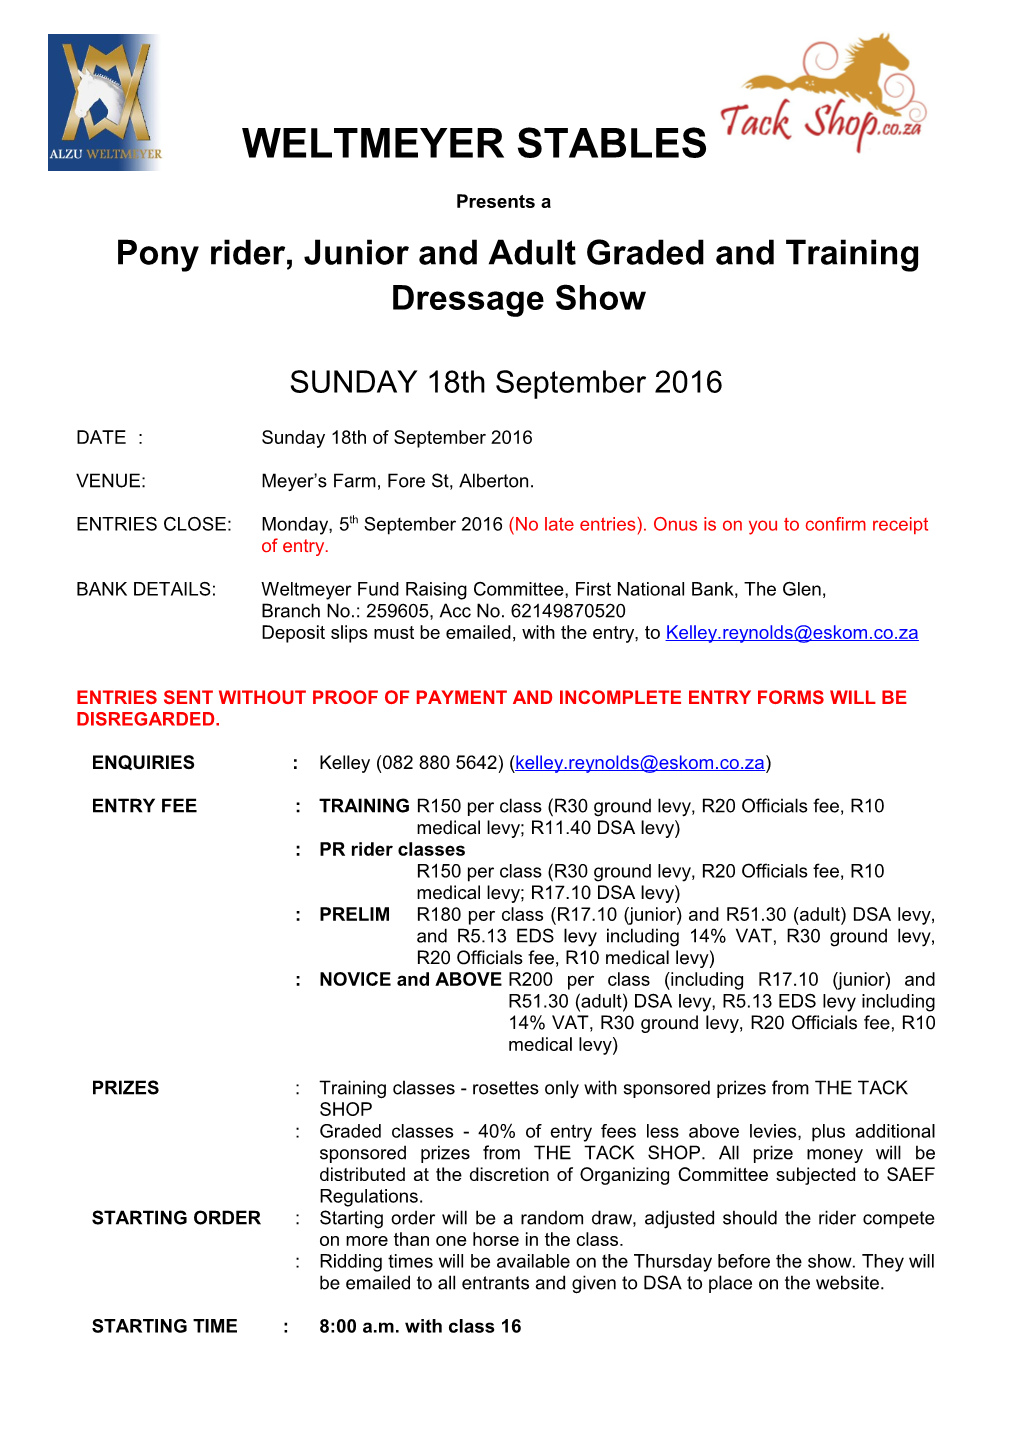 Pony Rider, Junior and Adultgraded and Training Dressageshow